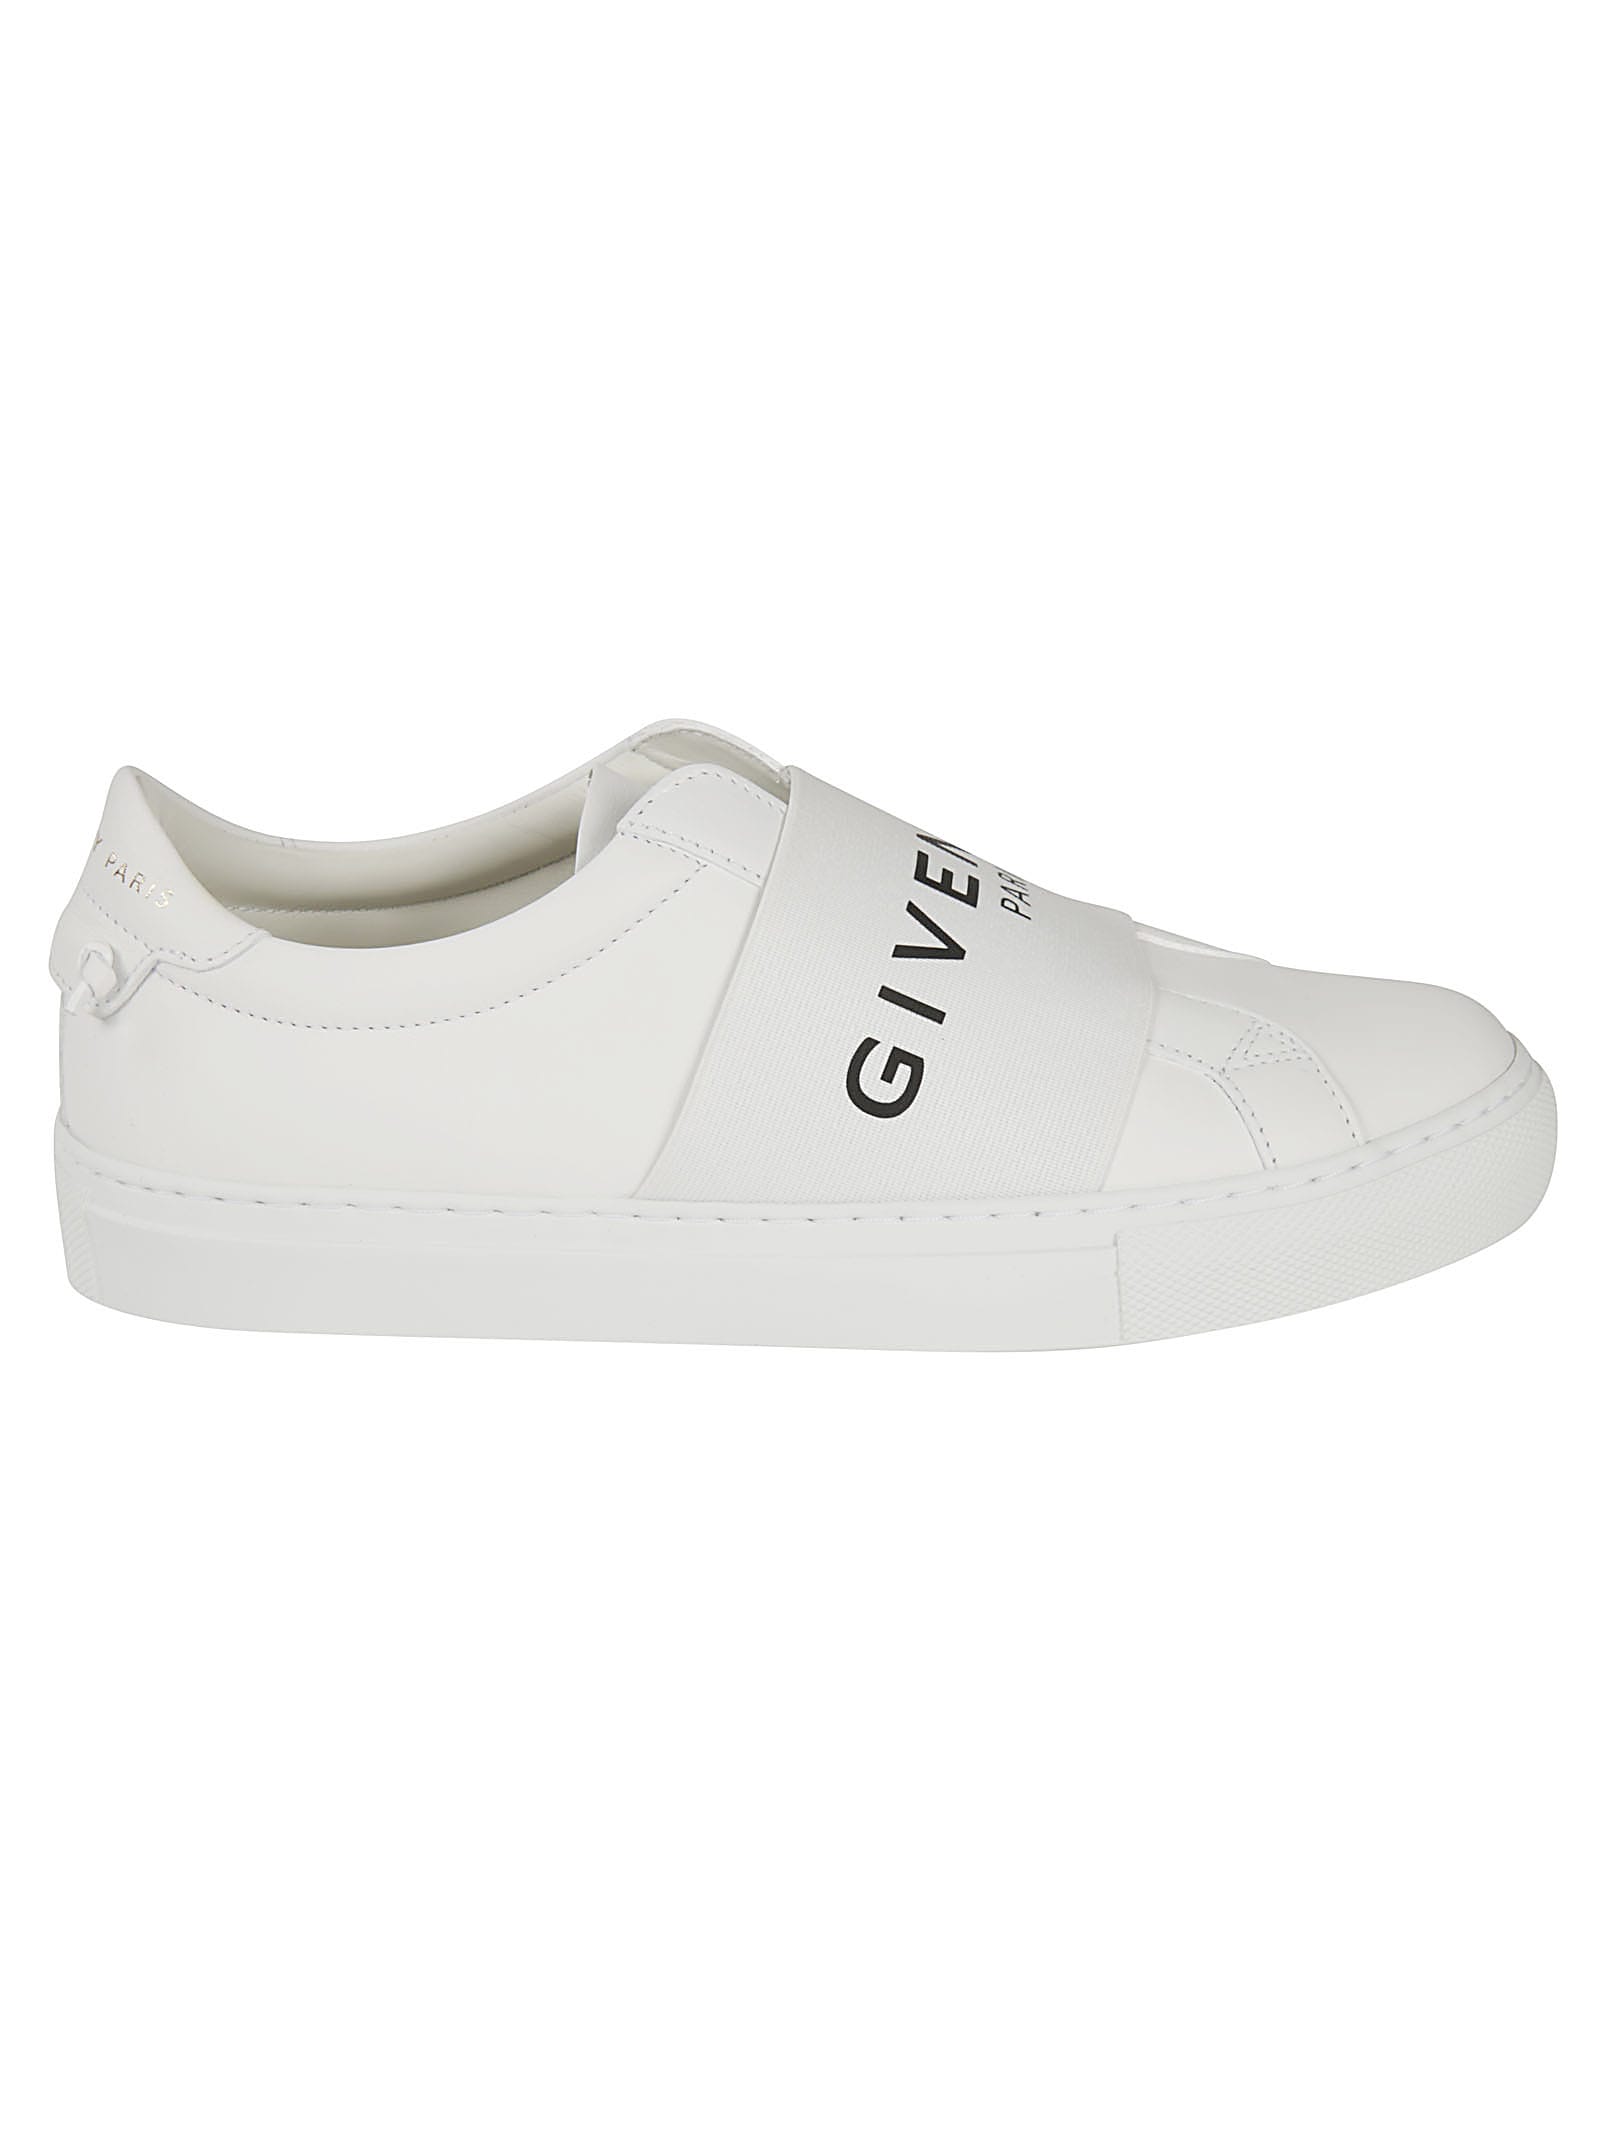 givenchy sneakers price